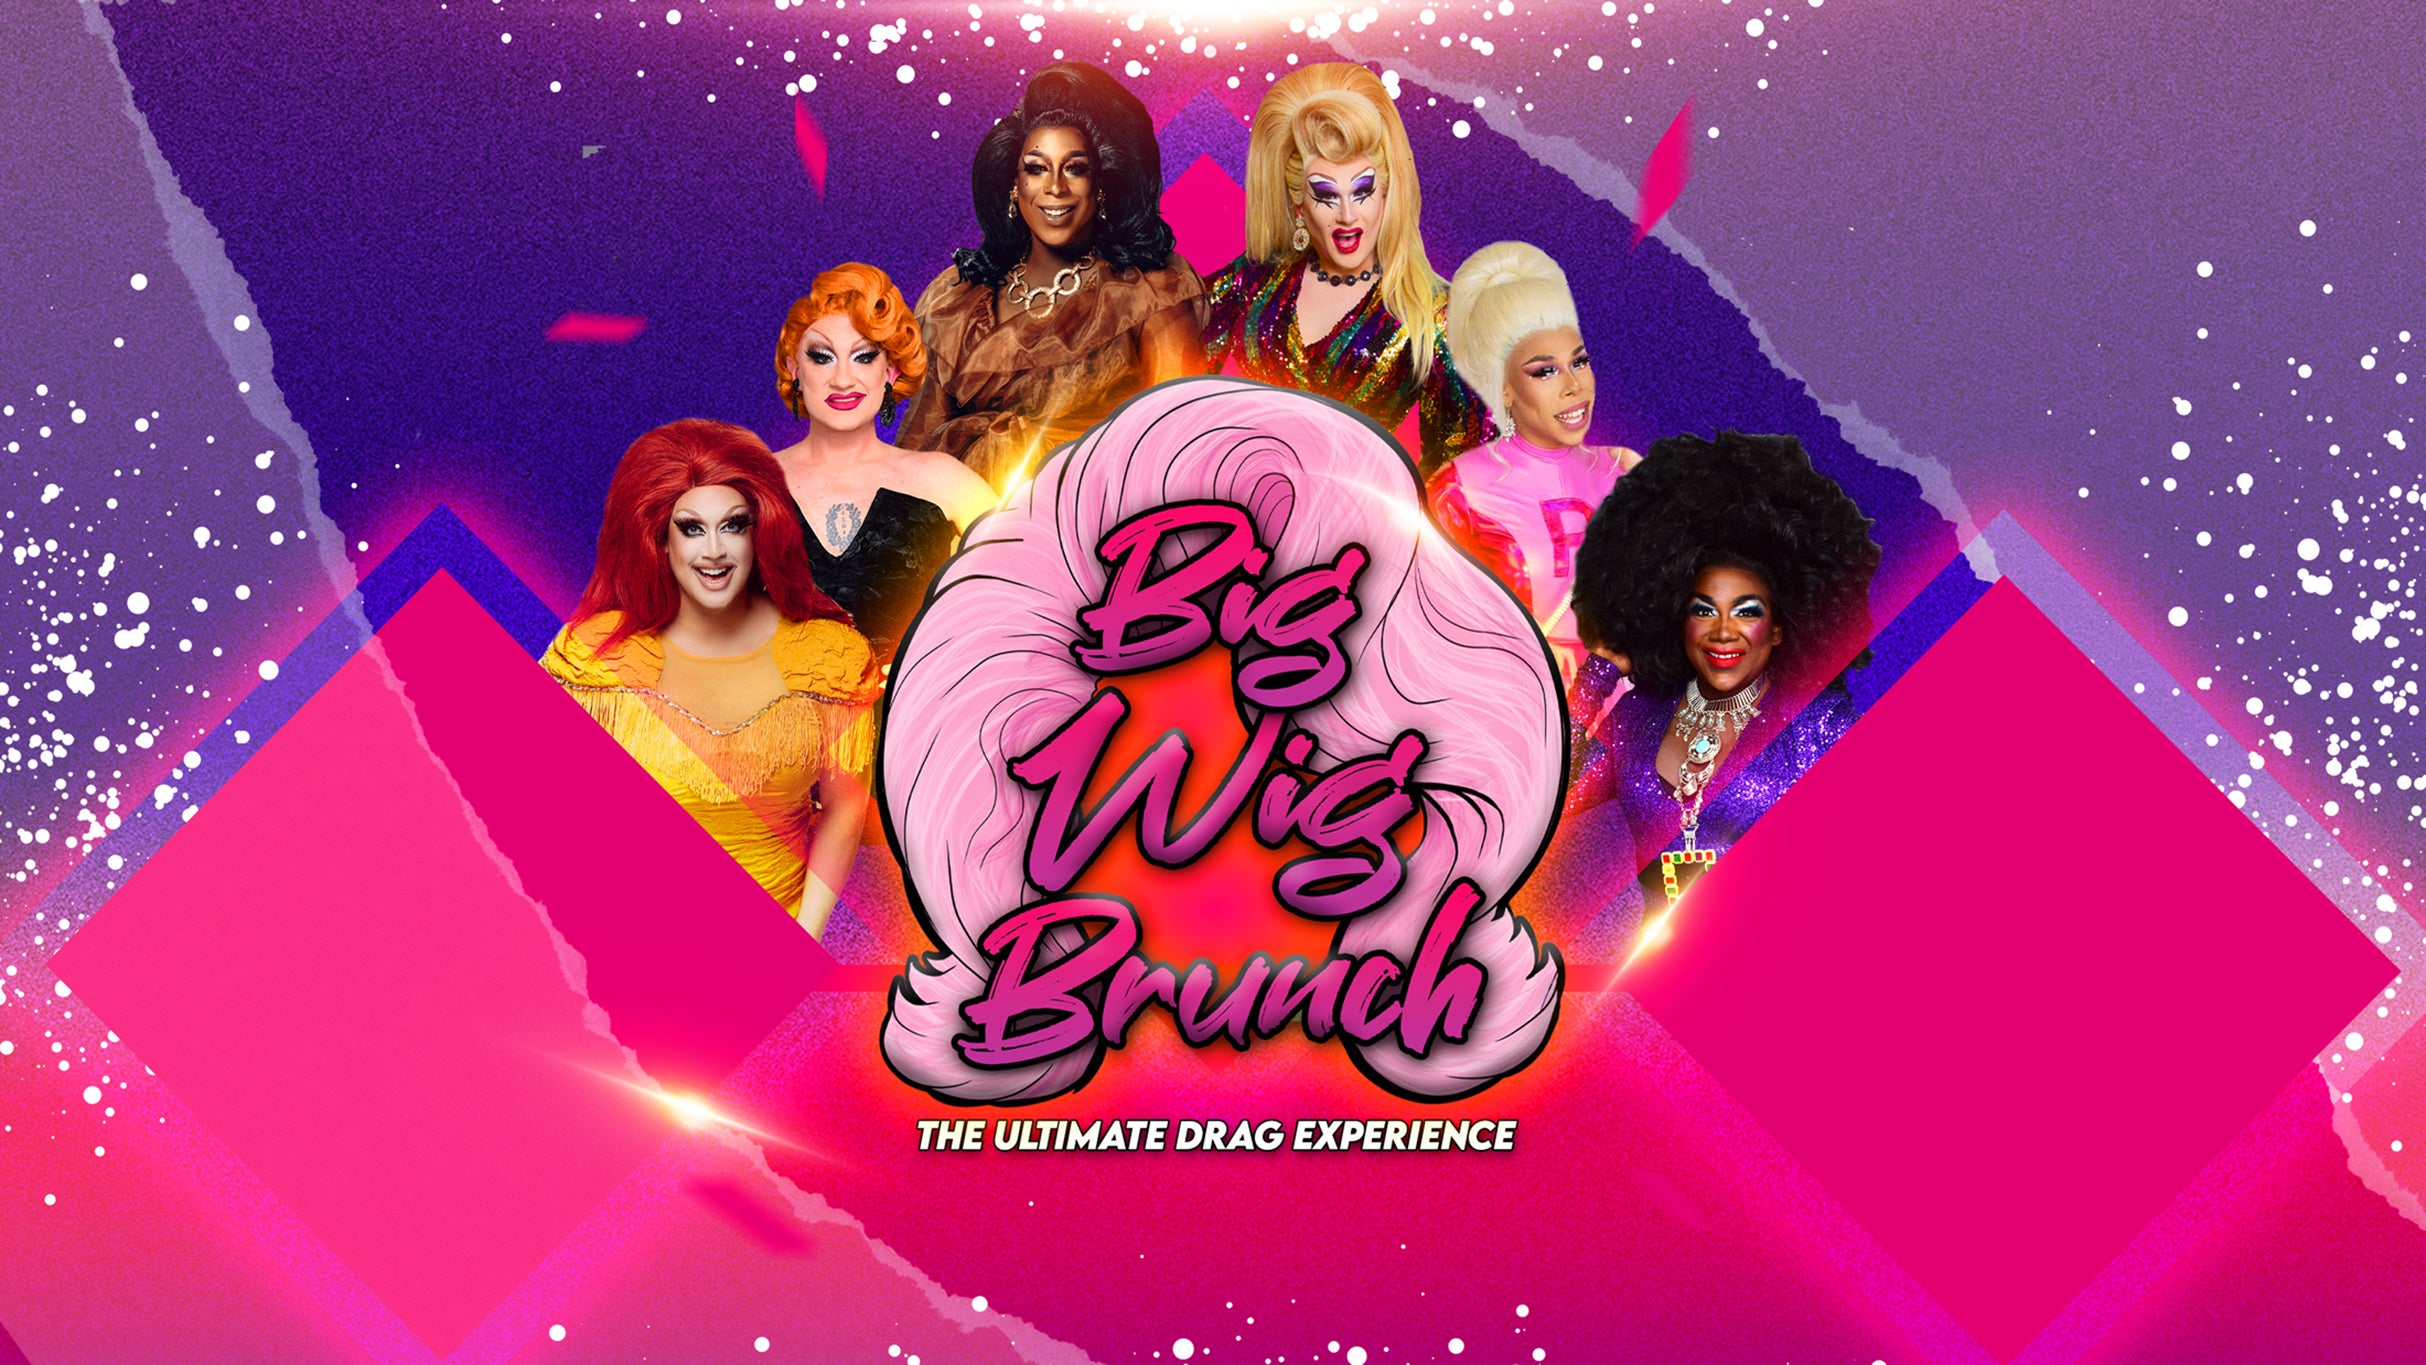 Big Wig Glee Brunch: The Ultimate Drag Experience